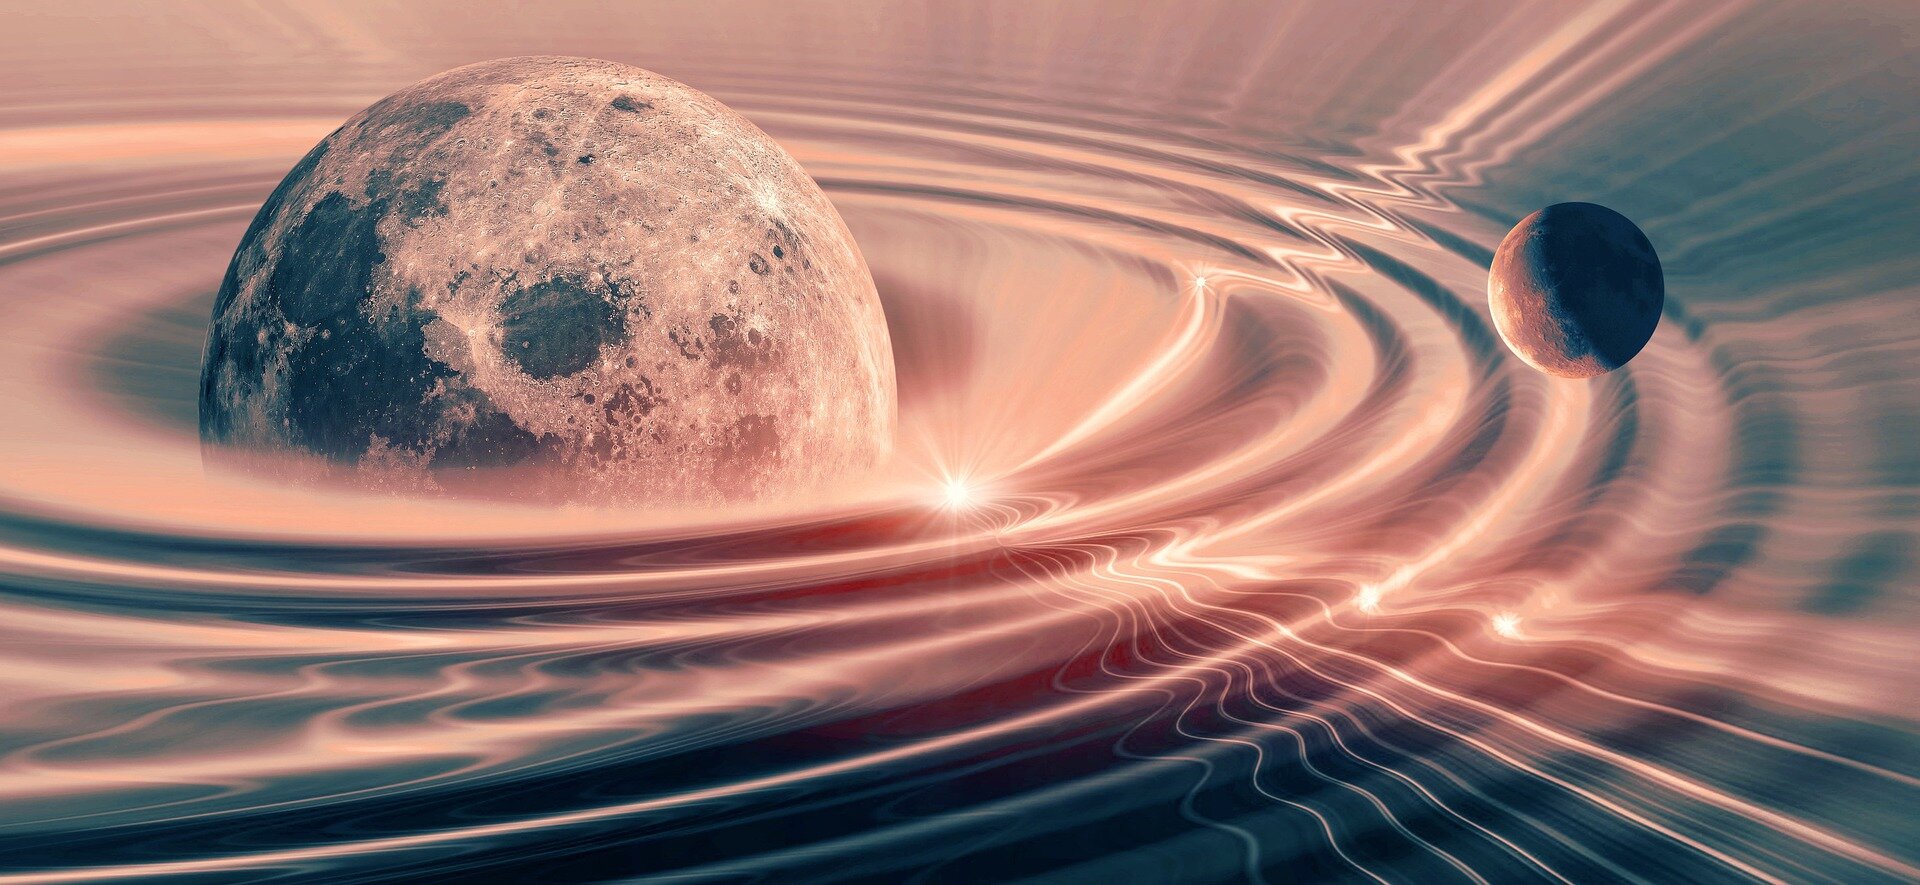 “Innovations in Gravitational Waves Could Unveil Cosmic Mysteries”